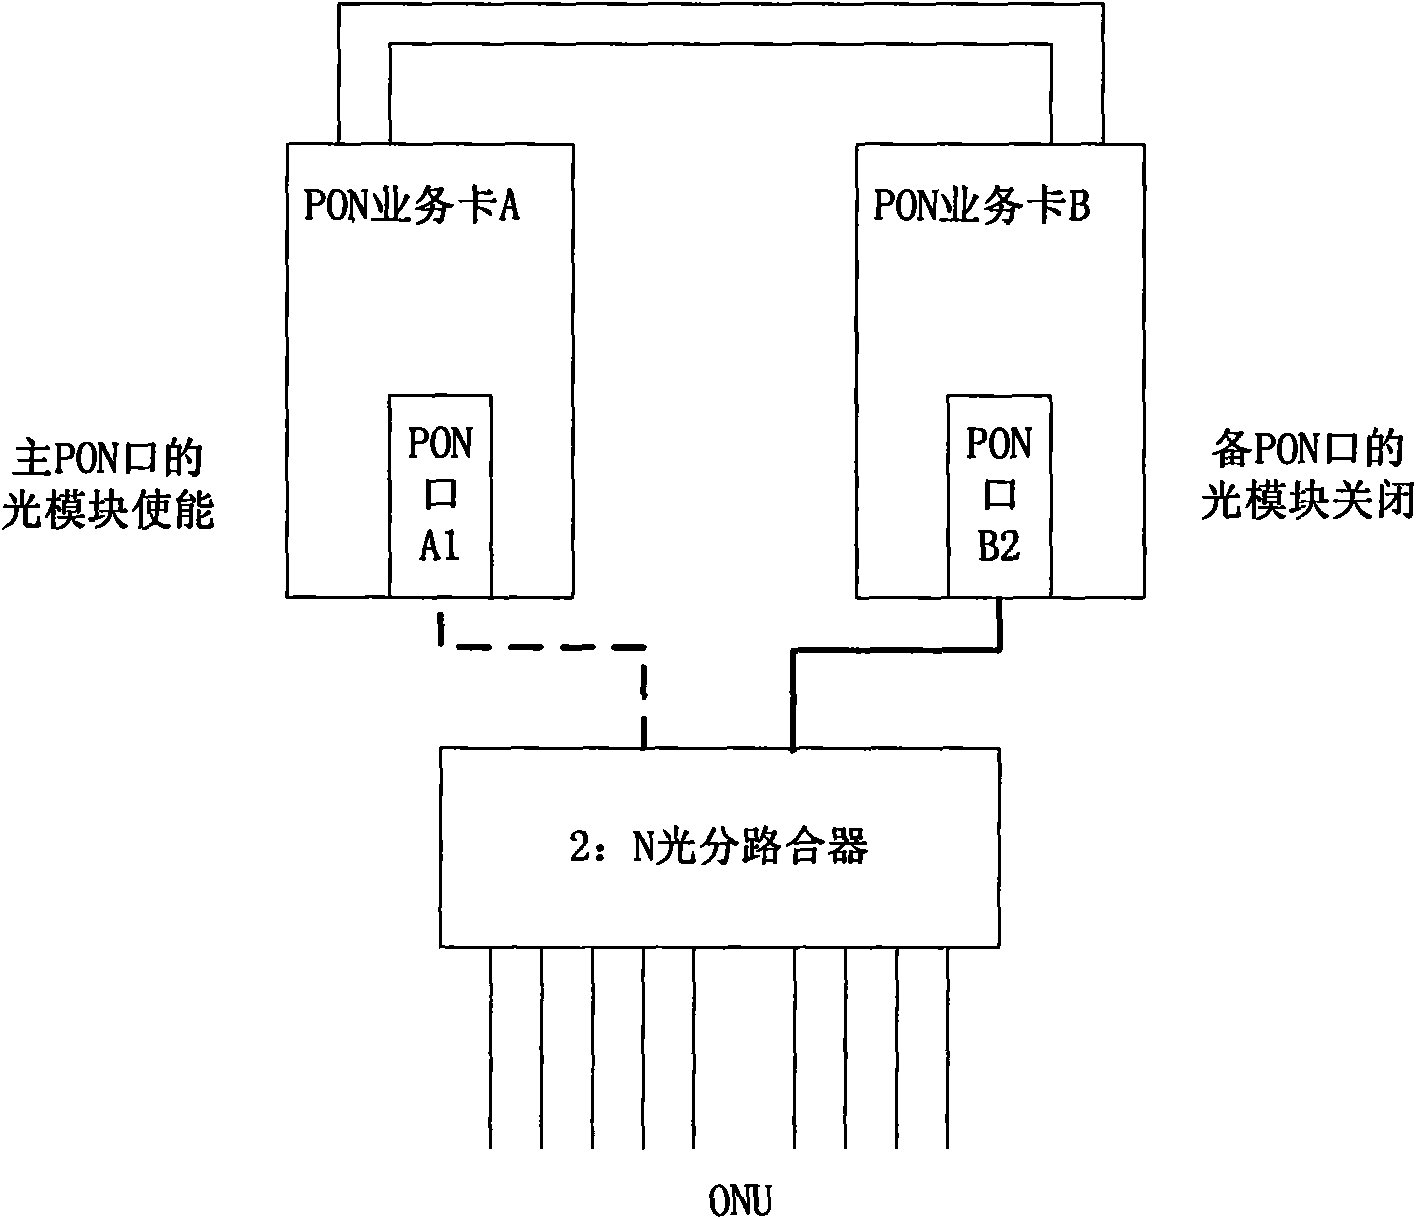 Method and device for rapid protection switching of passive optical network (PON) ports in any slot position in 10 Gbit/s Ethernet PON (10G-EPON) system